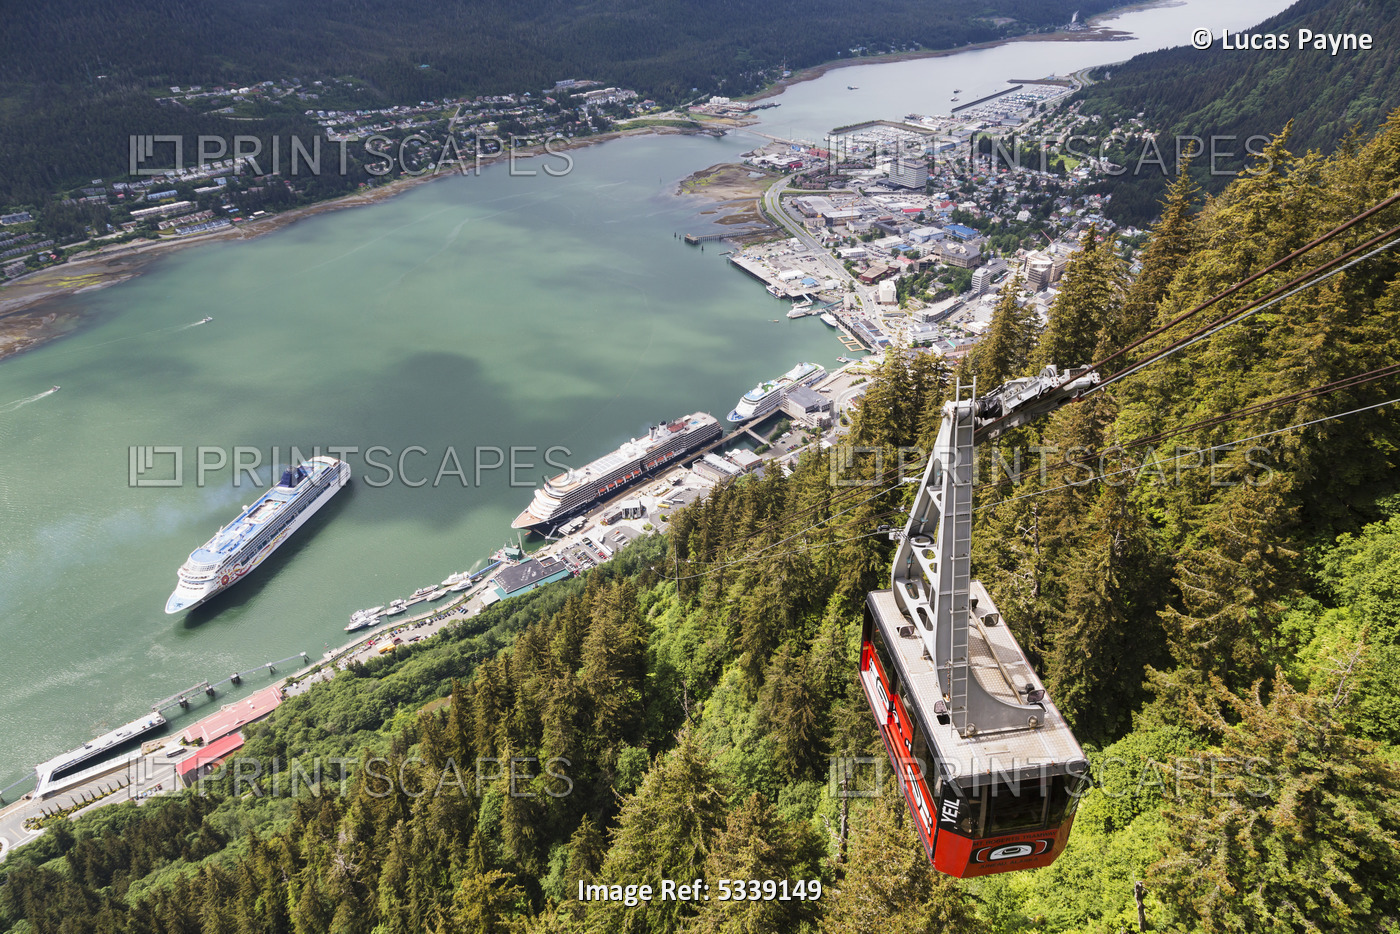 View Of The Mount Roberts Tramway Above Juneau And Cruise Ships In Gastineau ...